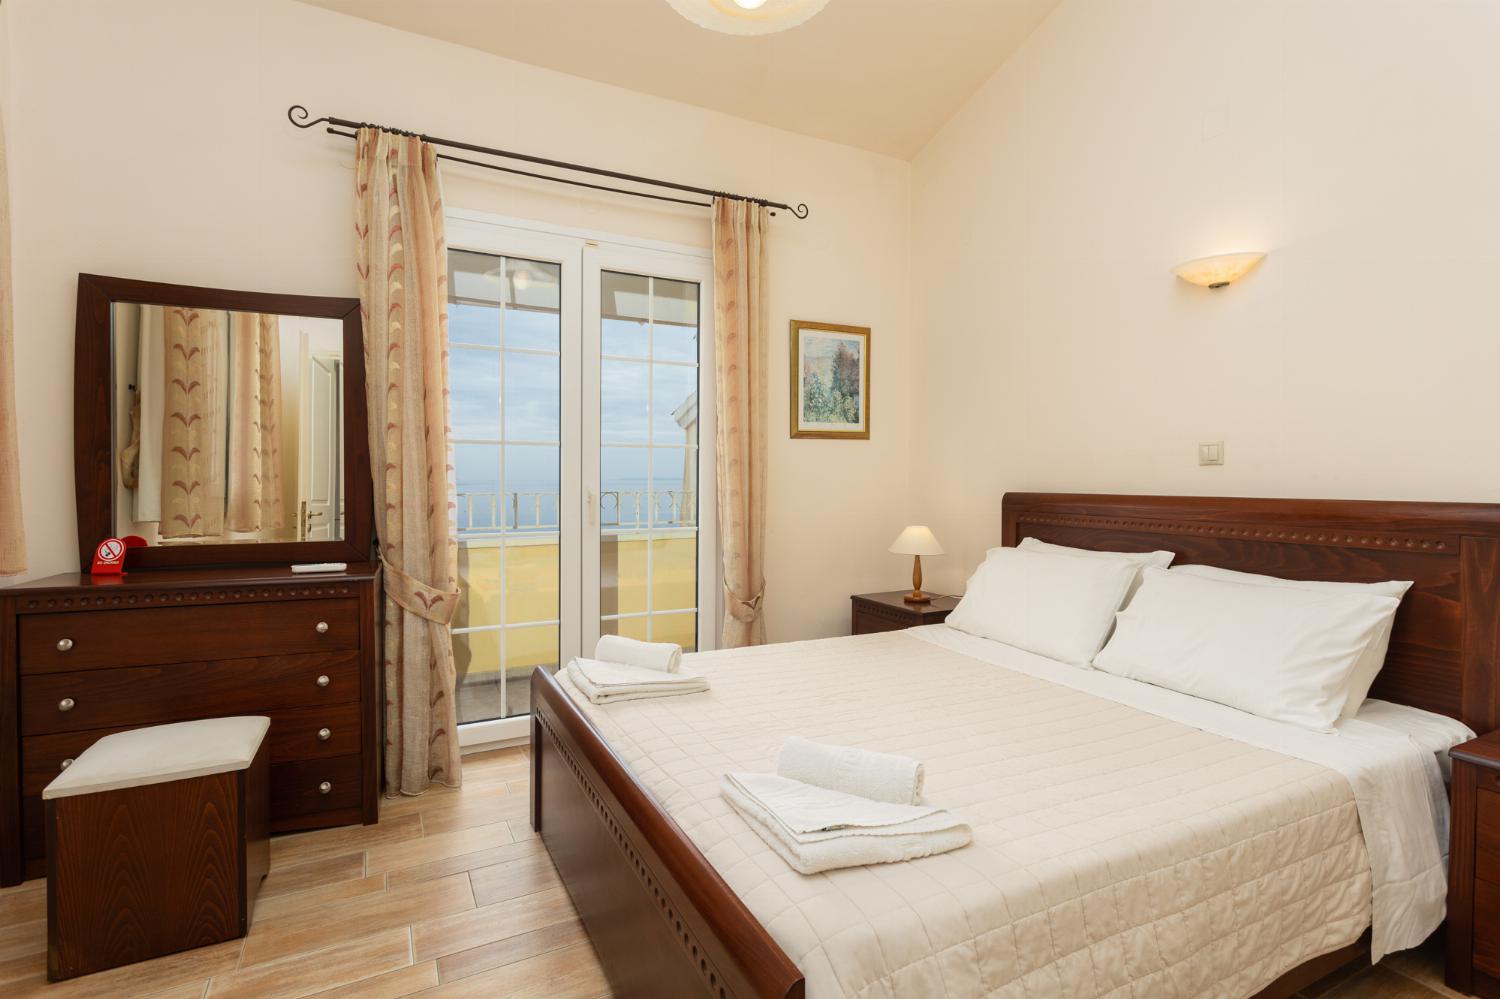 Double bedroom on second floor with A/C, sea views, and balcony access